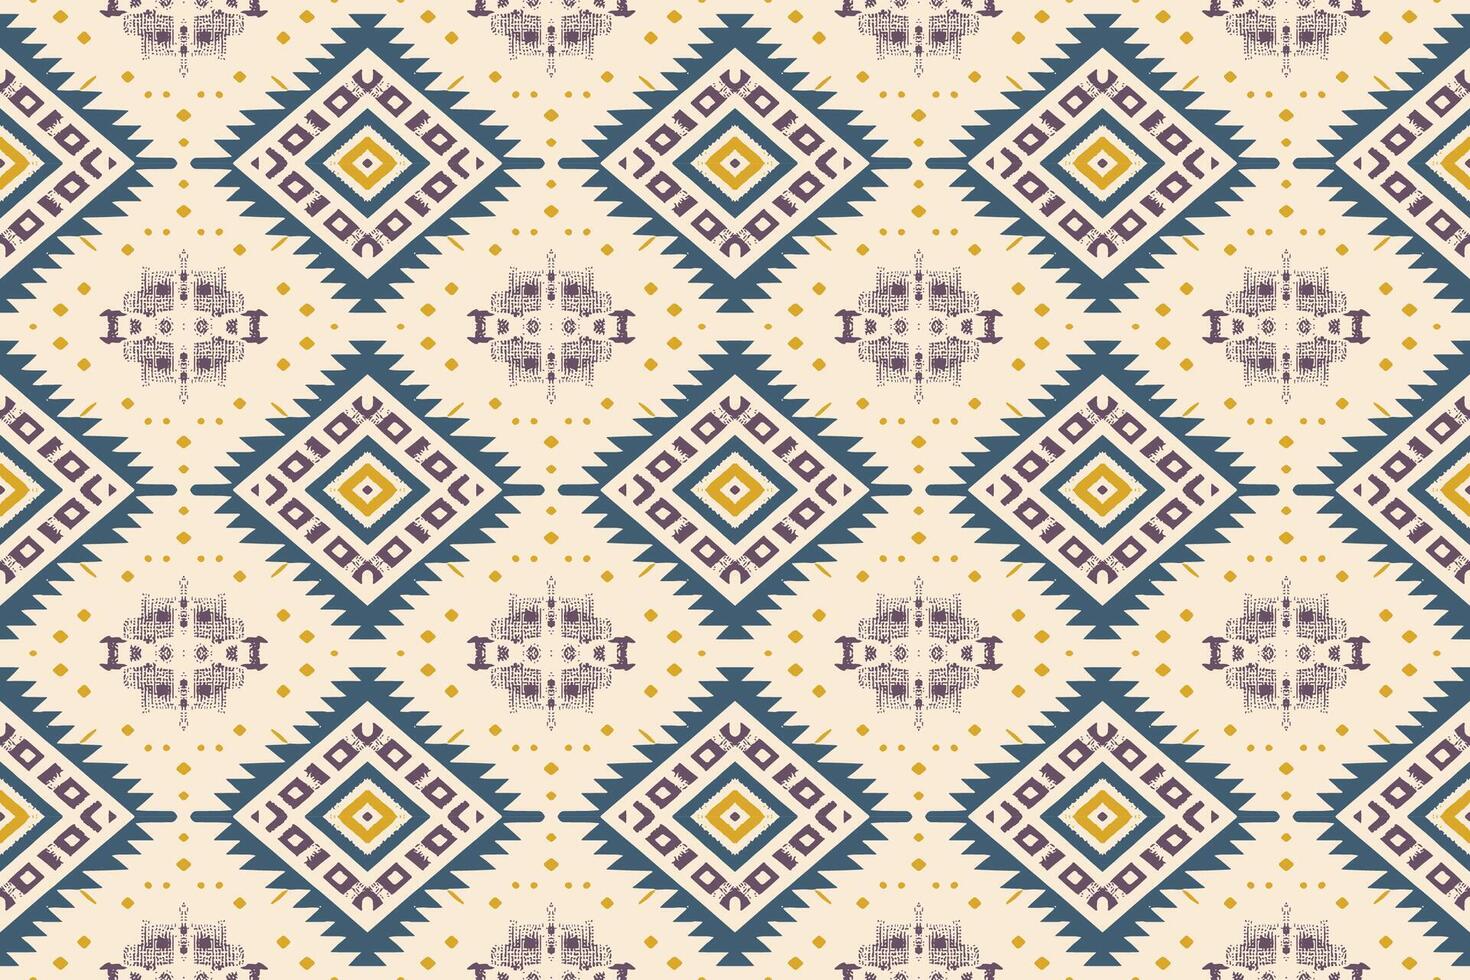 Ikat geometric ornament with diamonds. Ikkat. Seamless pattern. Aztec style. Tribal ethnic vector texture. Folk embroidery, Indian, Scandinavian, Gypsy, Mexican, African rug, wallpaper.